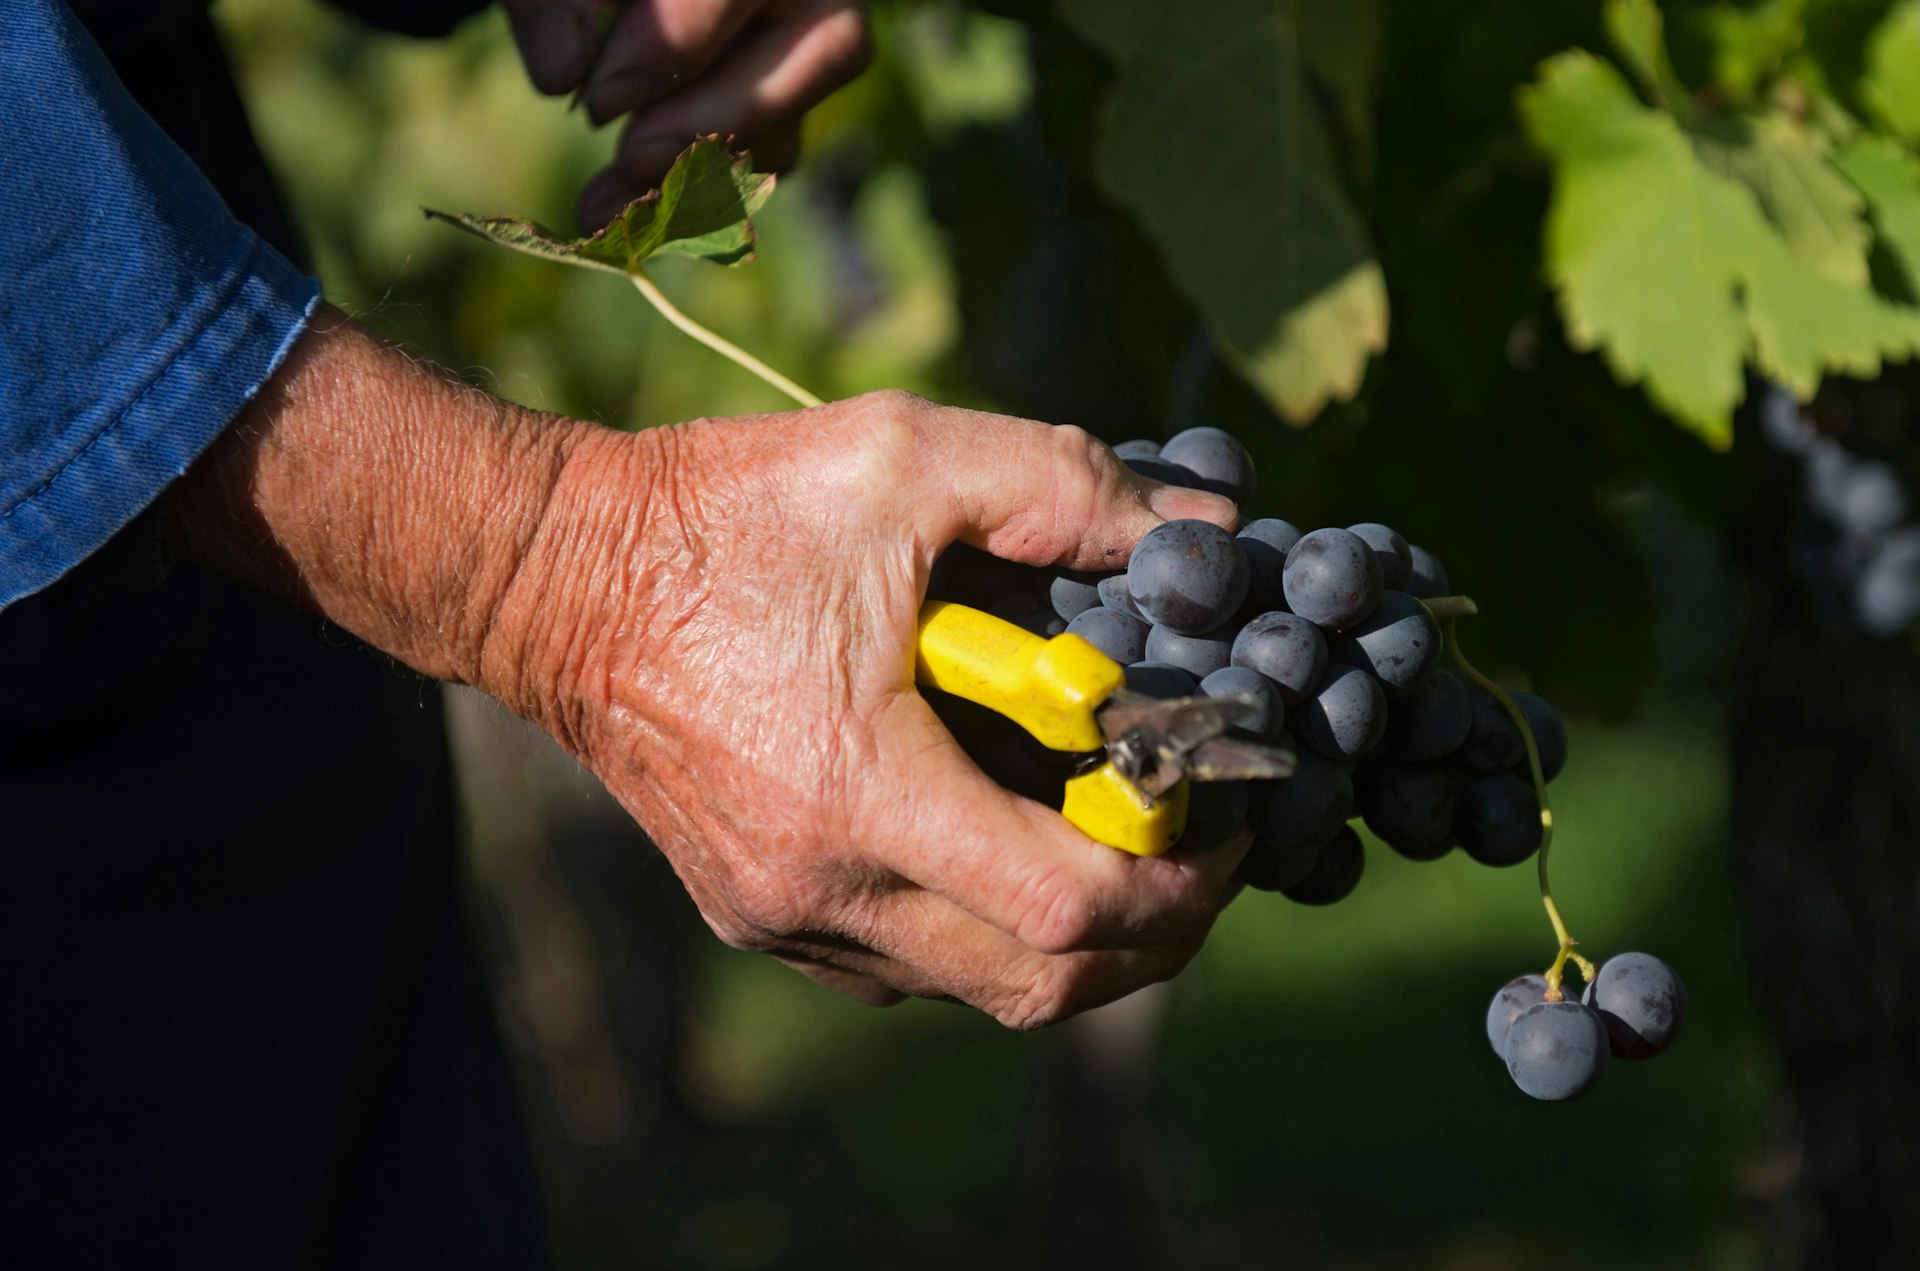 A man's tan hand extends from a blue denim sleeve on the left side of the frame, clutching yellow-handled pruning shears and red Trollinger grapes on a vine in Stuttgart Germany.